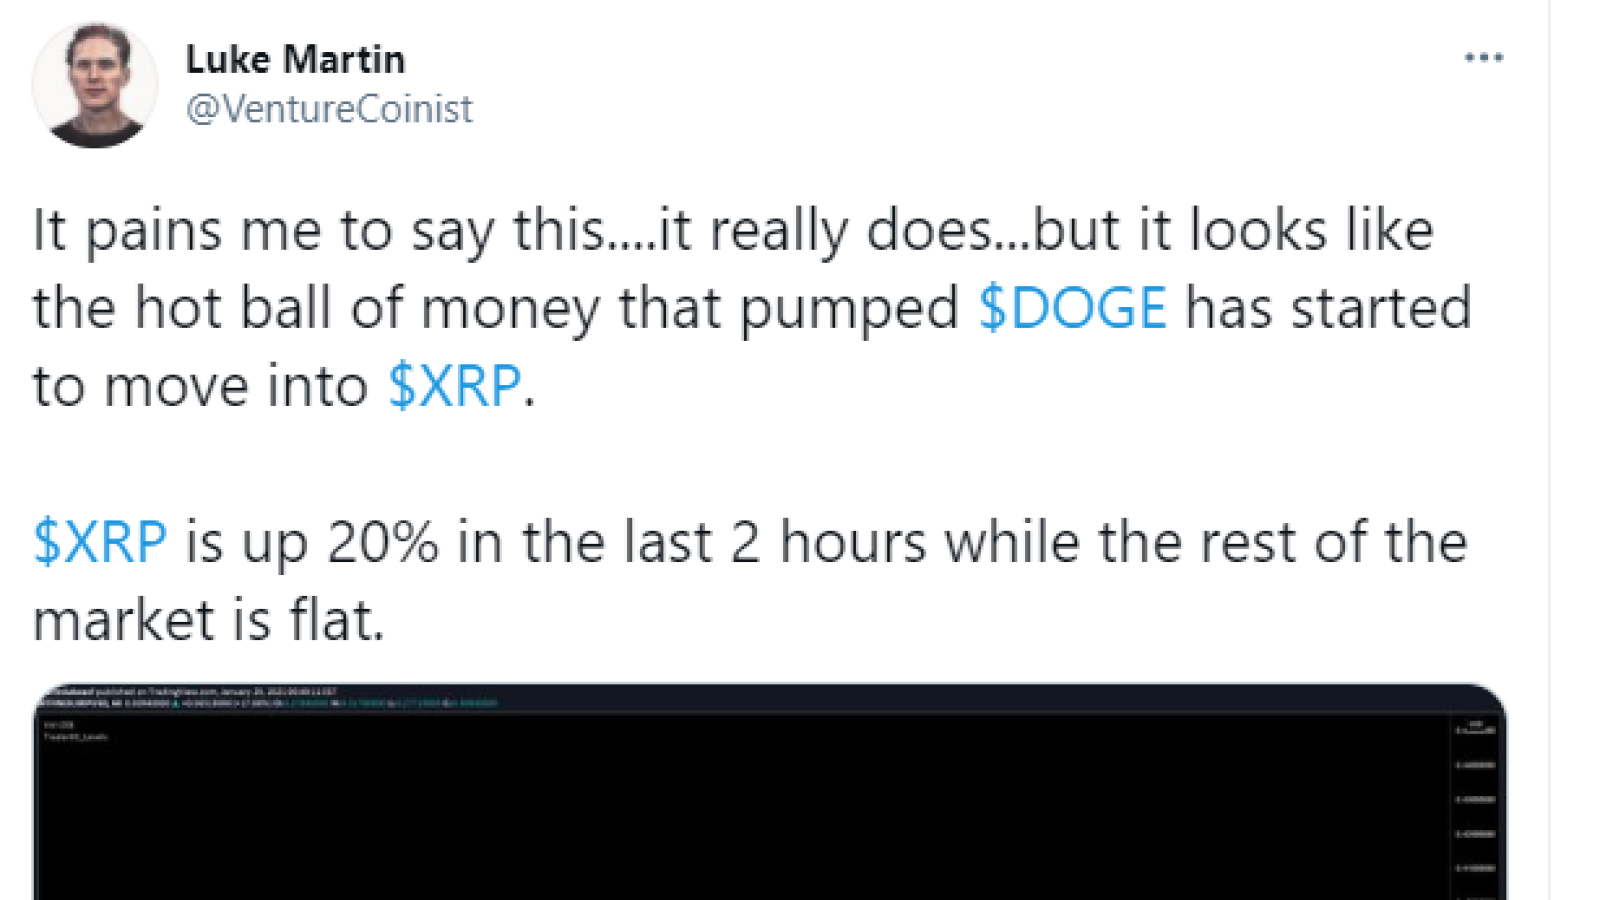 XRP pump may be inspired by DOGE money: Luke Martin